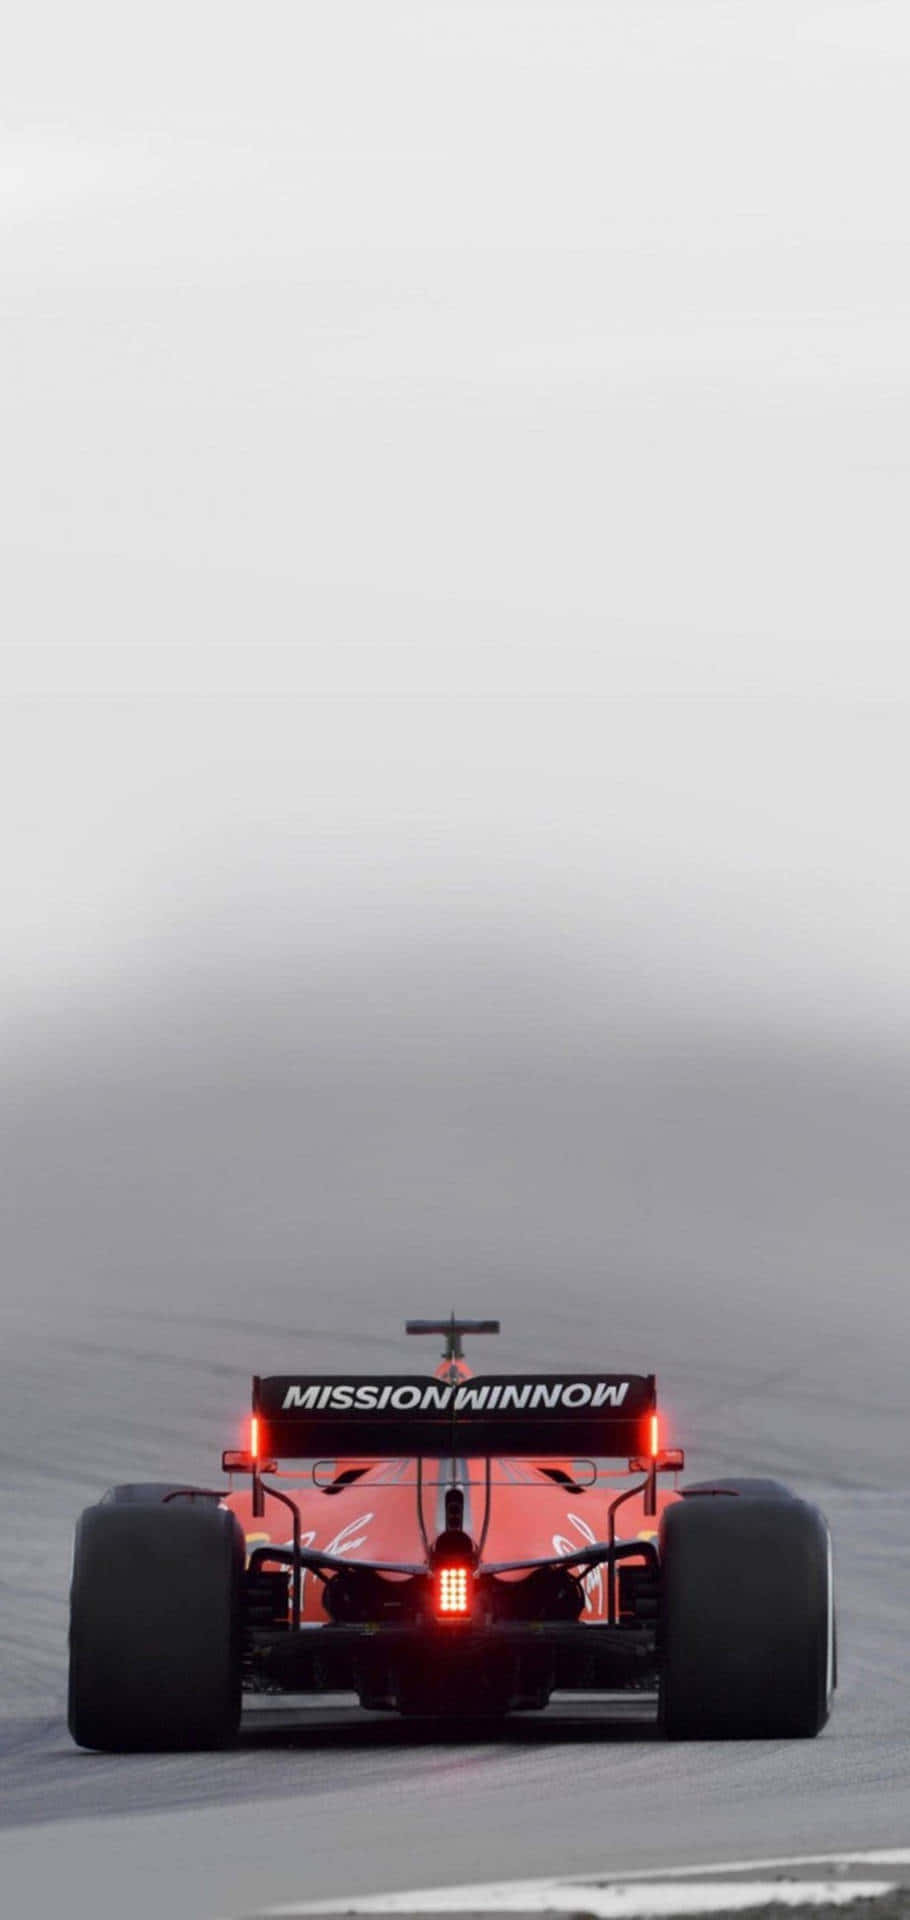 A Red Racing Car Driving On A Track Wallpaper